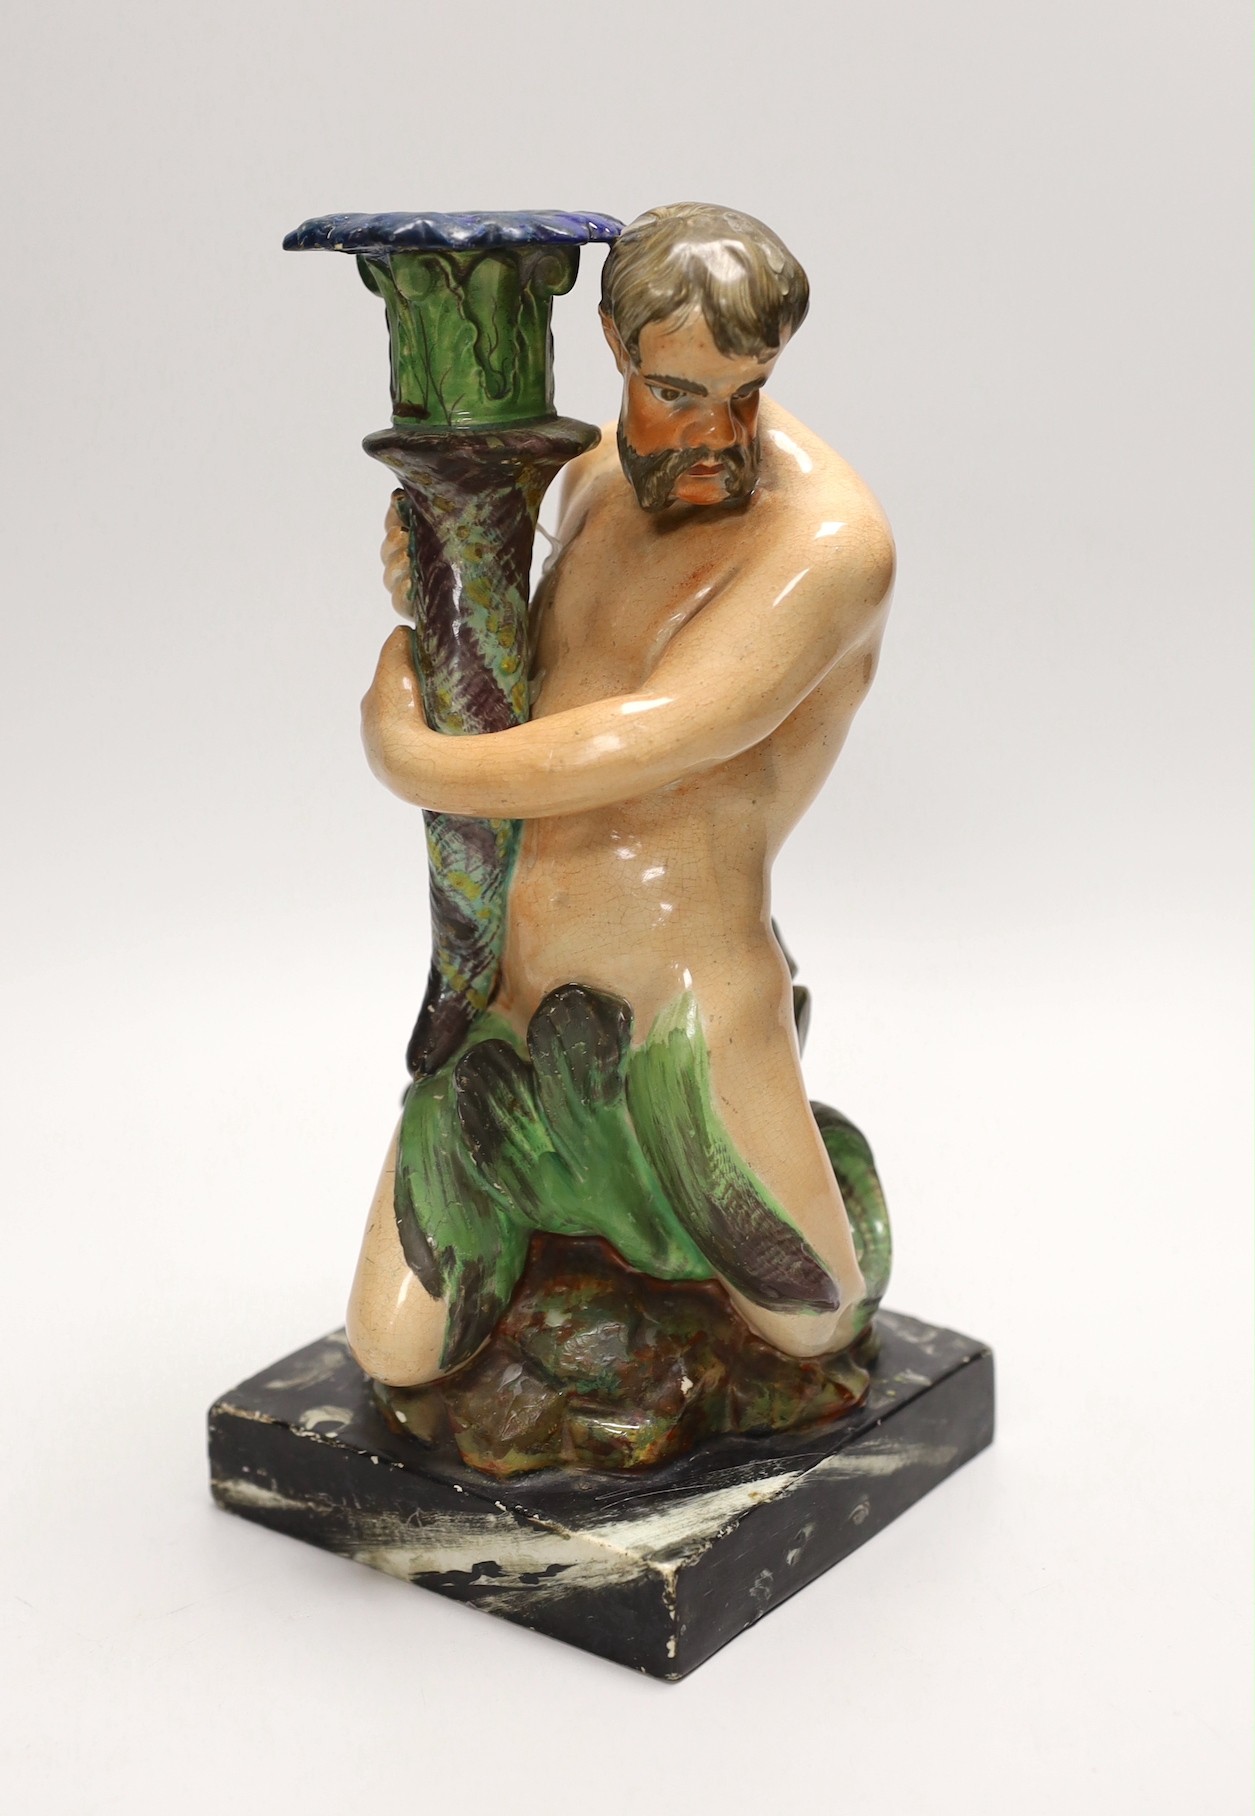 A pearlware ‘Triton’ figural candlestick, attributed to Wood & Caldwell, c.1800, 24cm, after a design by John Flaxman